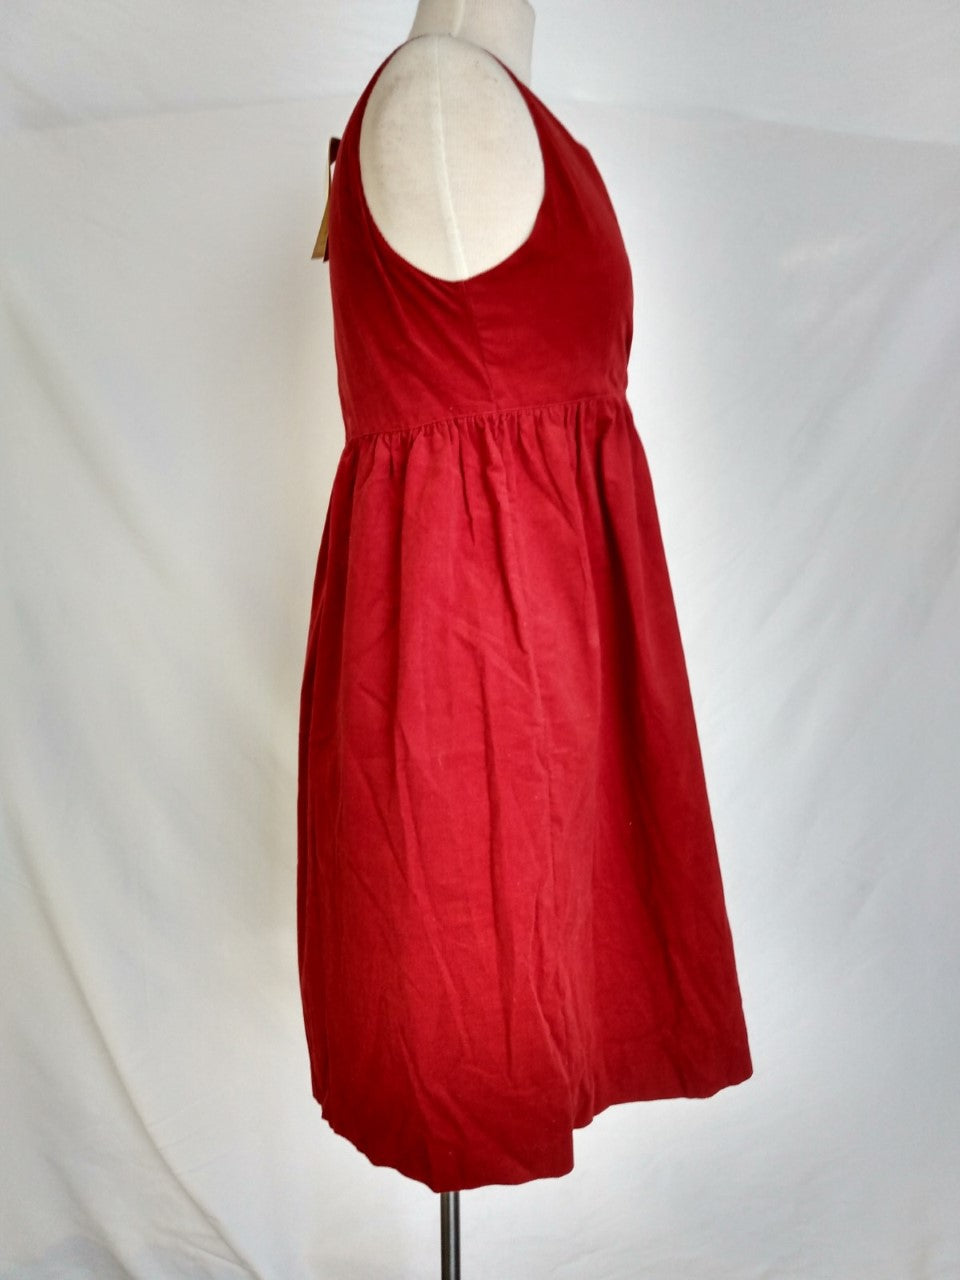 NWT - LAURA ASHLEY red Sleeveless Mother and Child Dress - 11-12 years